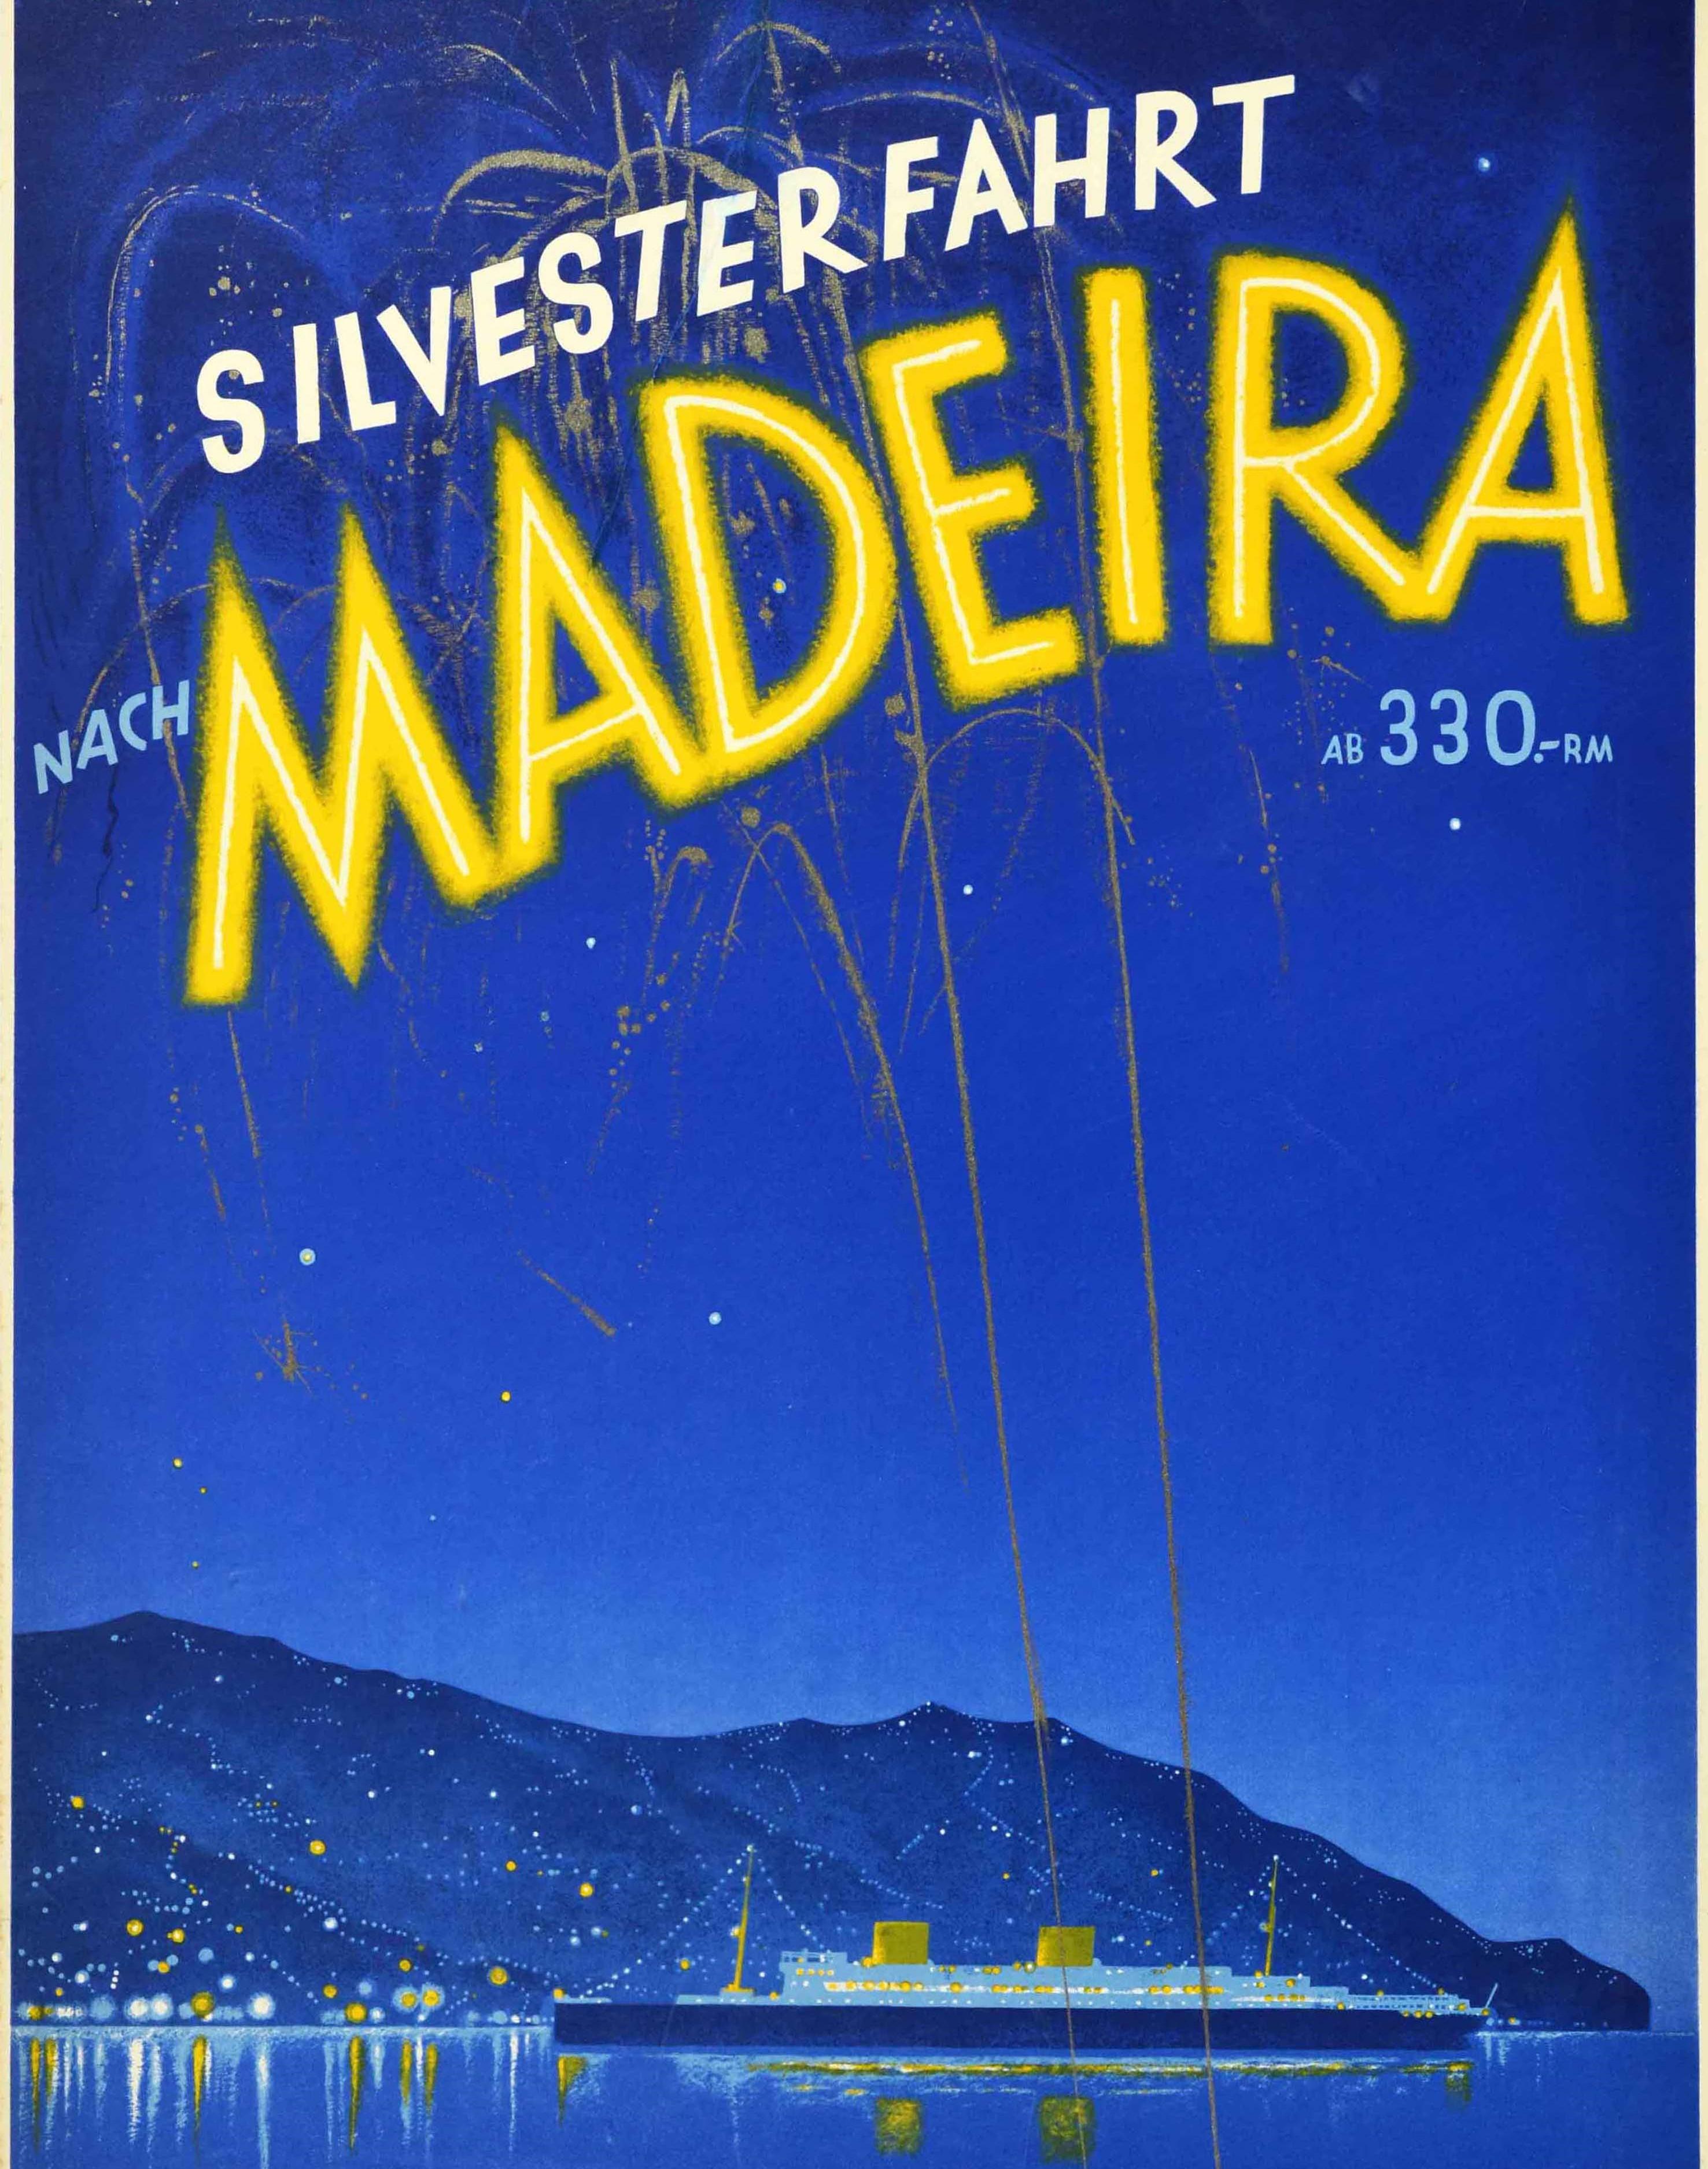 Original Vintage Poster New Year Cruise To Madeira Steamship Columbus Fireworks - Blue Print by Kuck